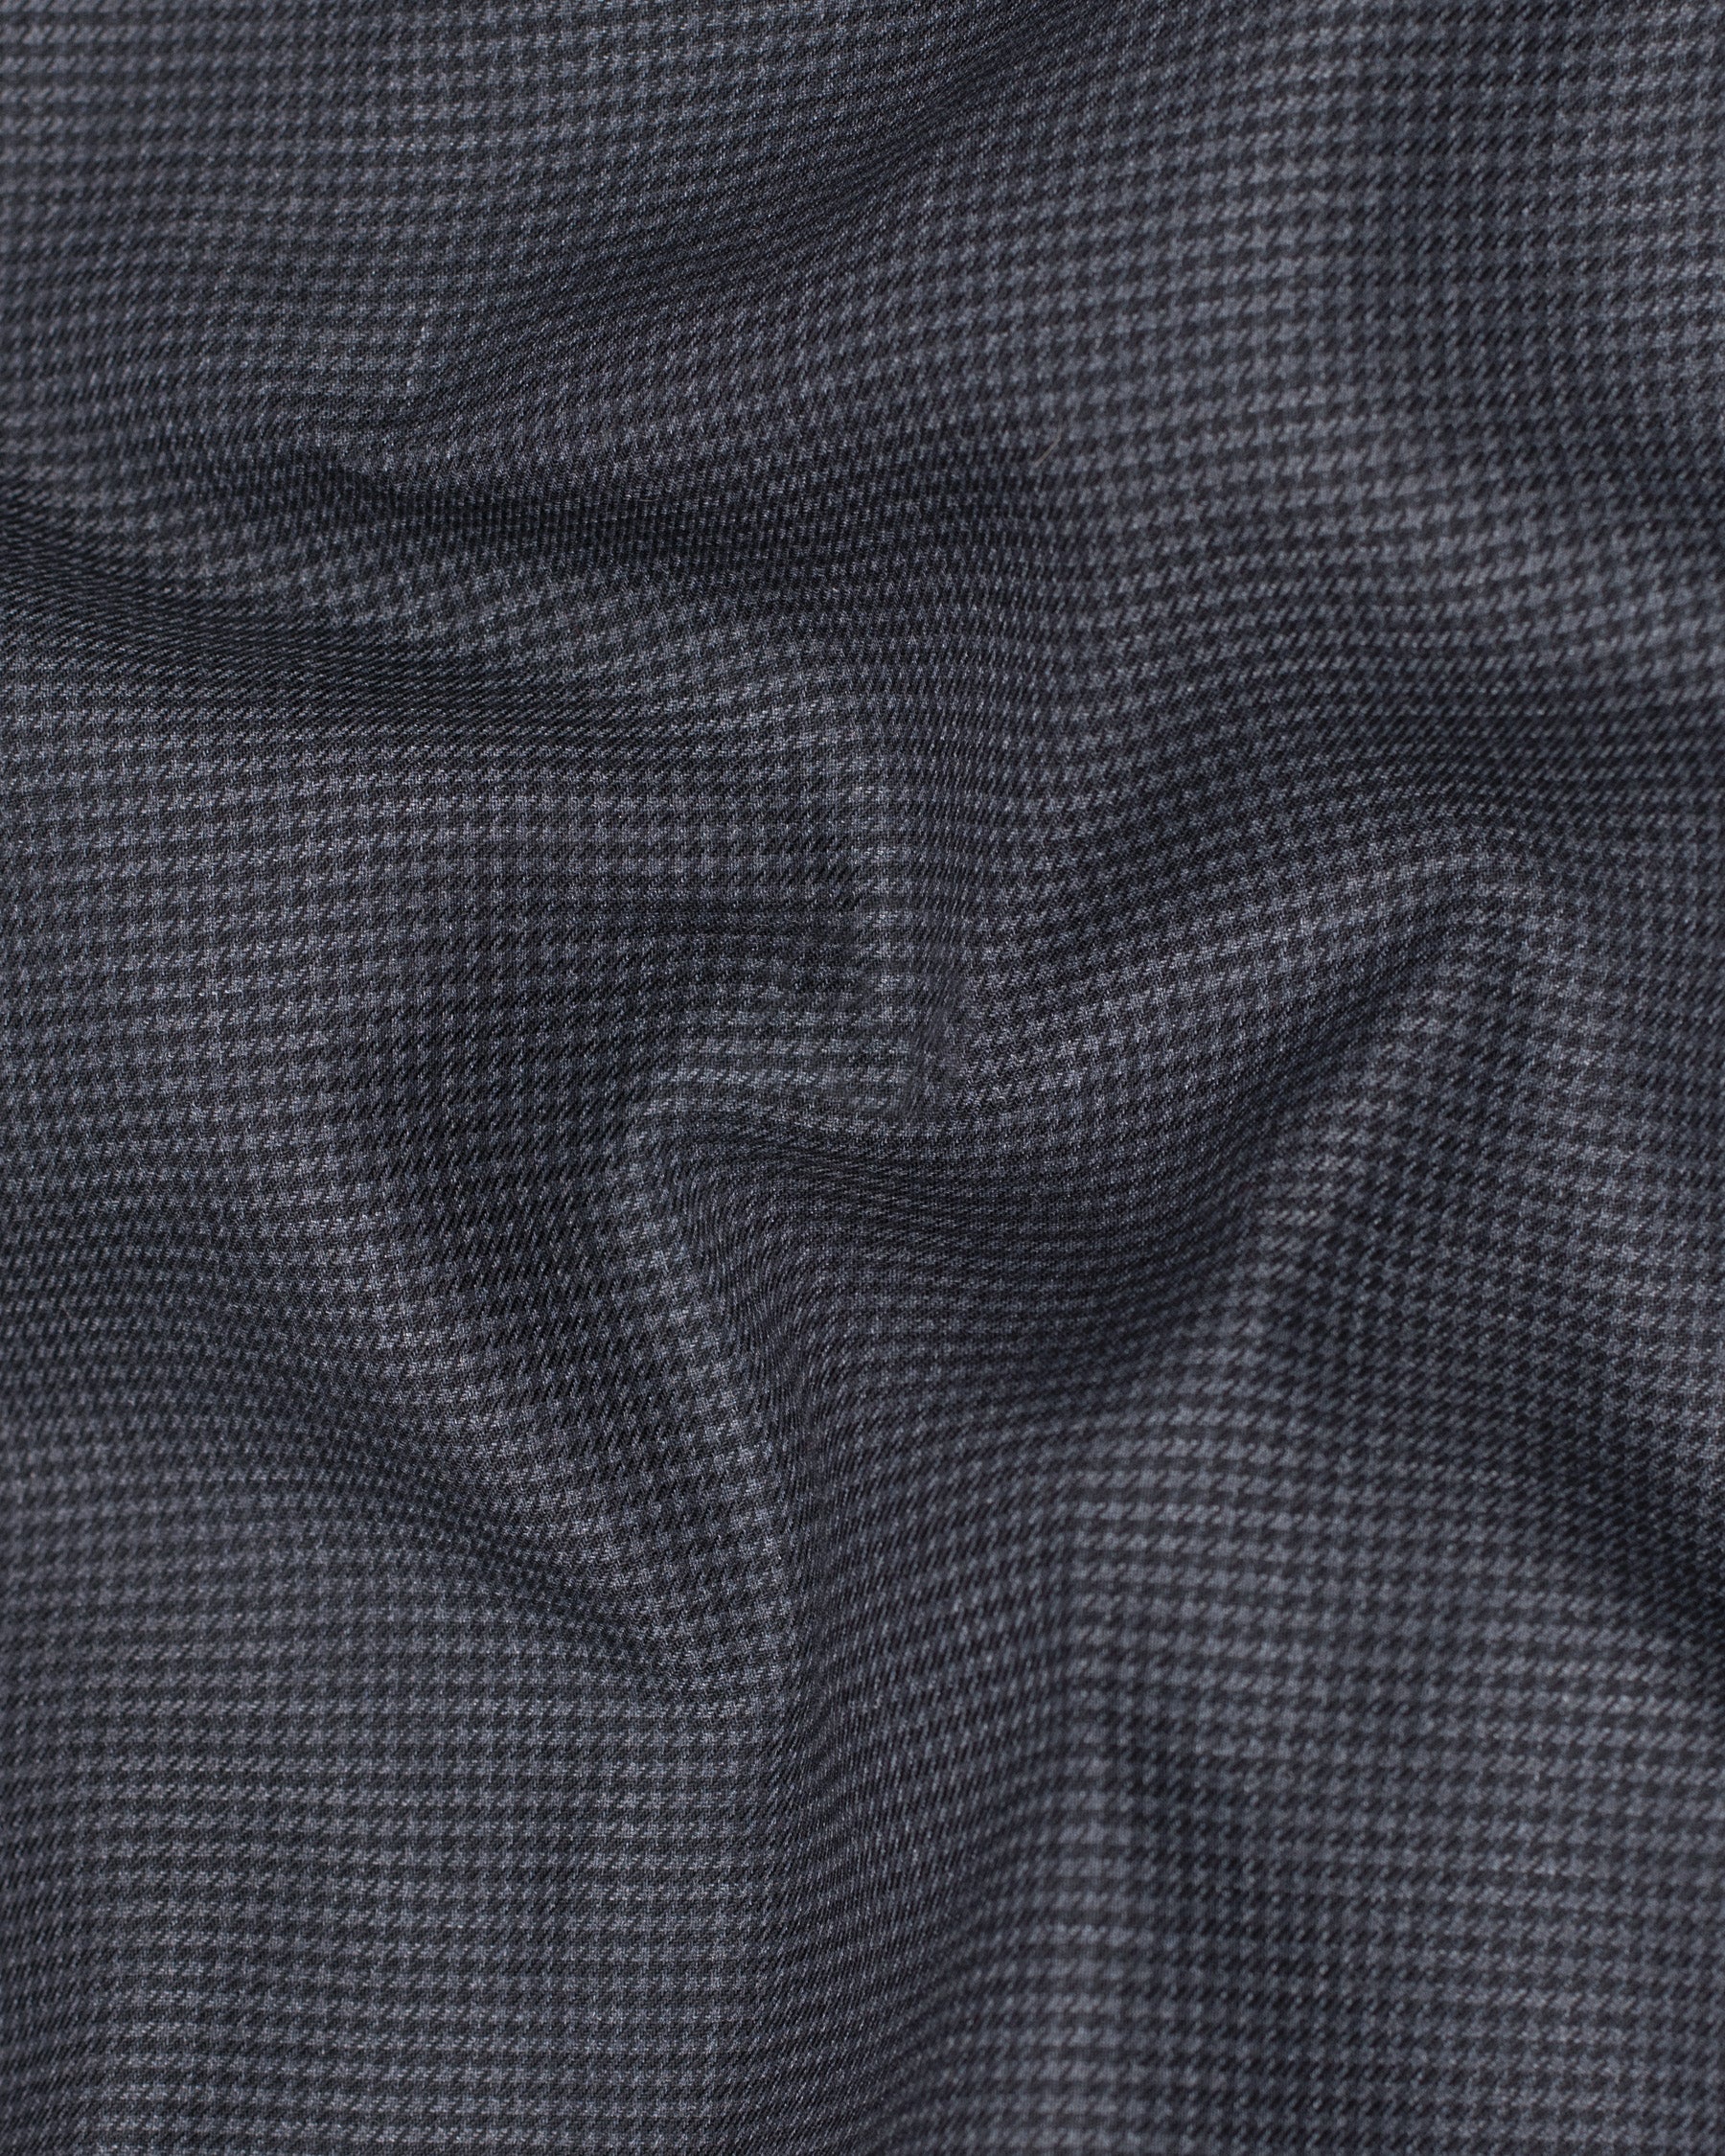 Pale Sky Grey houndstooth Wool Rich DouSTe Breasted Suit ST1311-DB-36, ST1311-DB-38, ST1311-DB-40, ST1311-DB-42, ST1311-DB-44, ST1311-DB-46, ST1311-DB-48, ST1311-DB-50, ST1311-DB-52, ST1311-DB-58, ST1311-DB-54, ST1311-DB-56, ST1311-DB-60